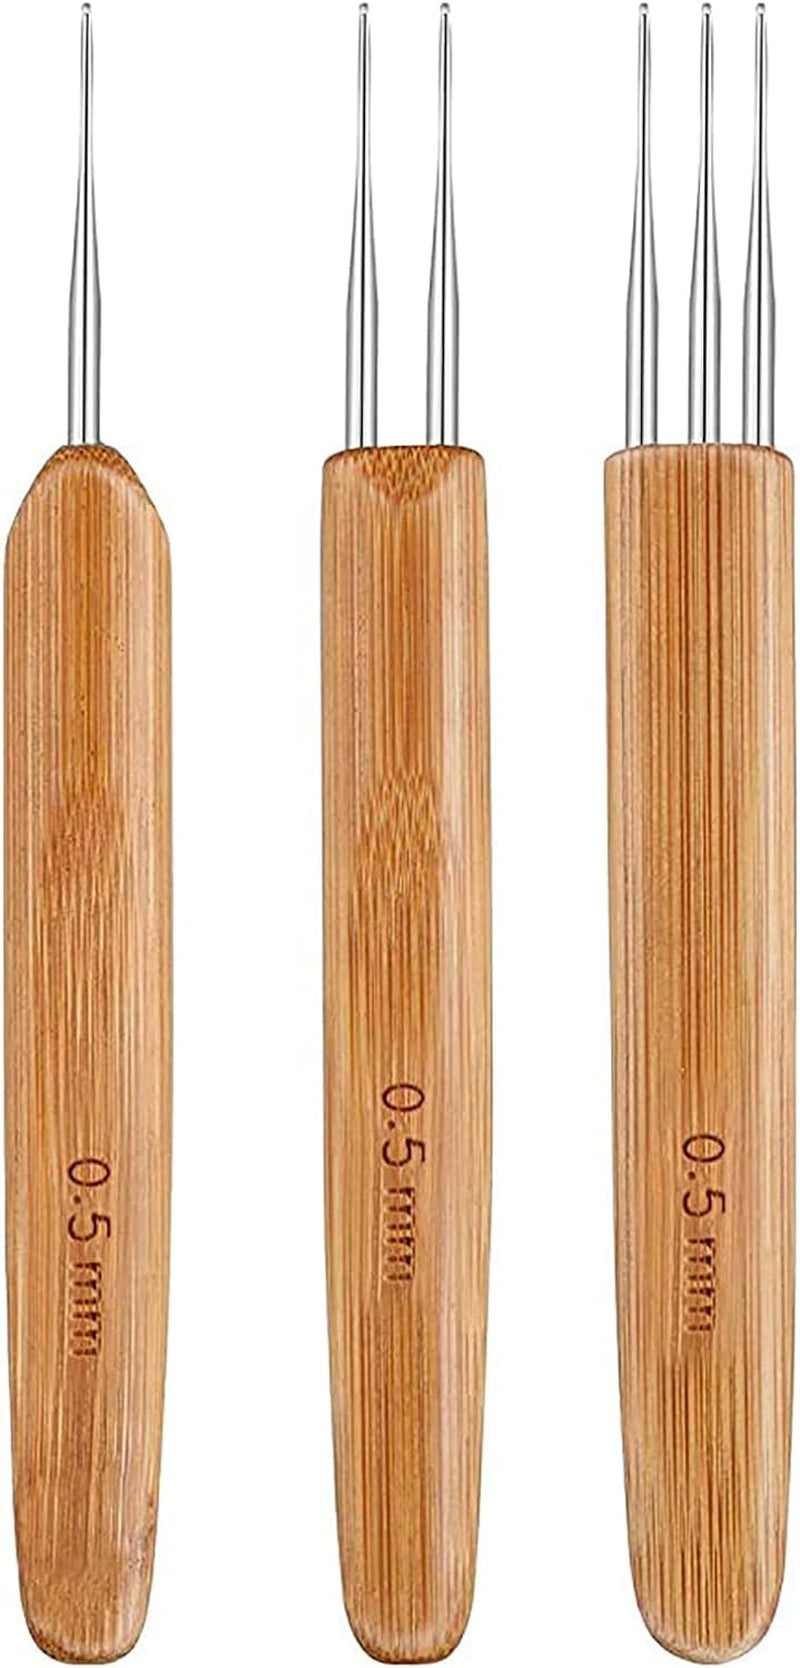 2 Pieces 6.3 Inch Wooden Bent Latch Hook Crochet Needle, Knitting Tool for Rug Making and Art Crafts